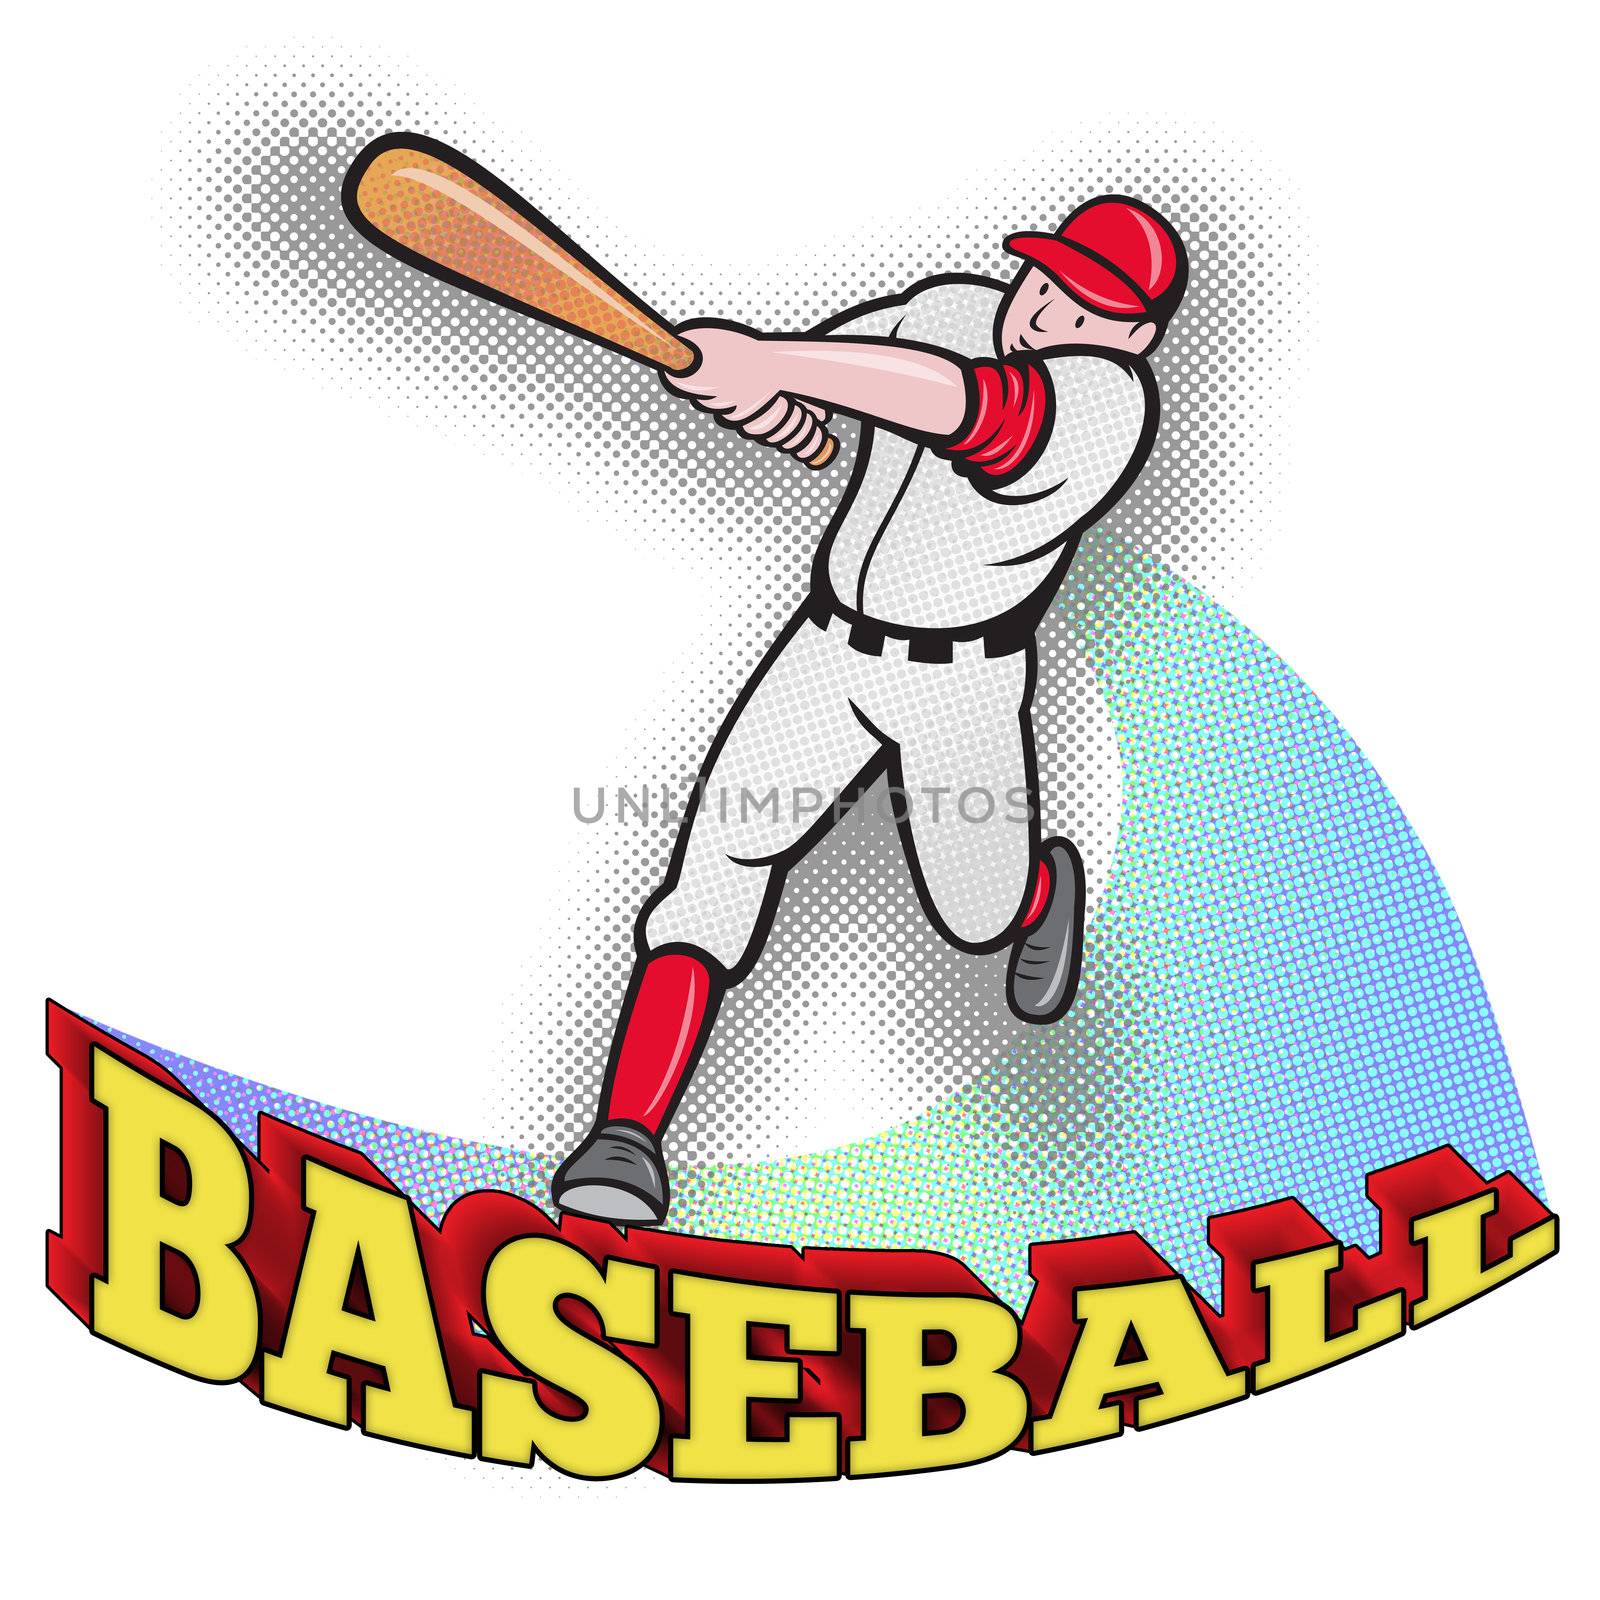 illustration of a baseball player batting cartoon style isolated on white with words Baseball